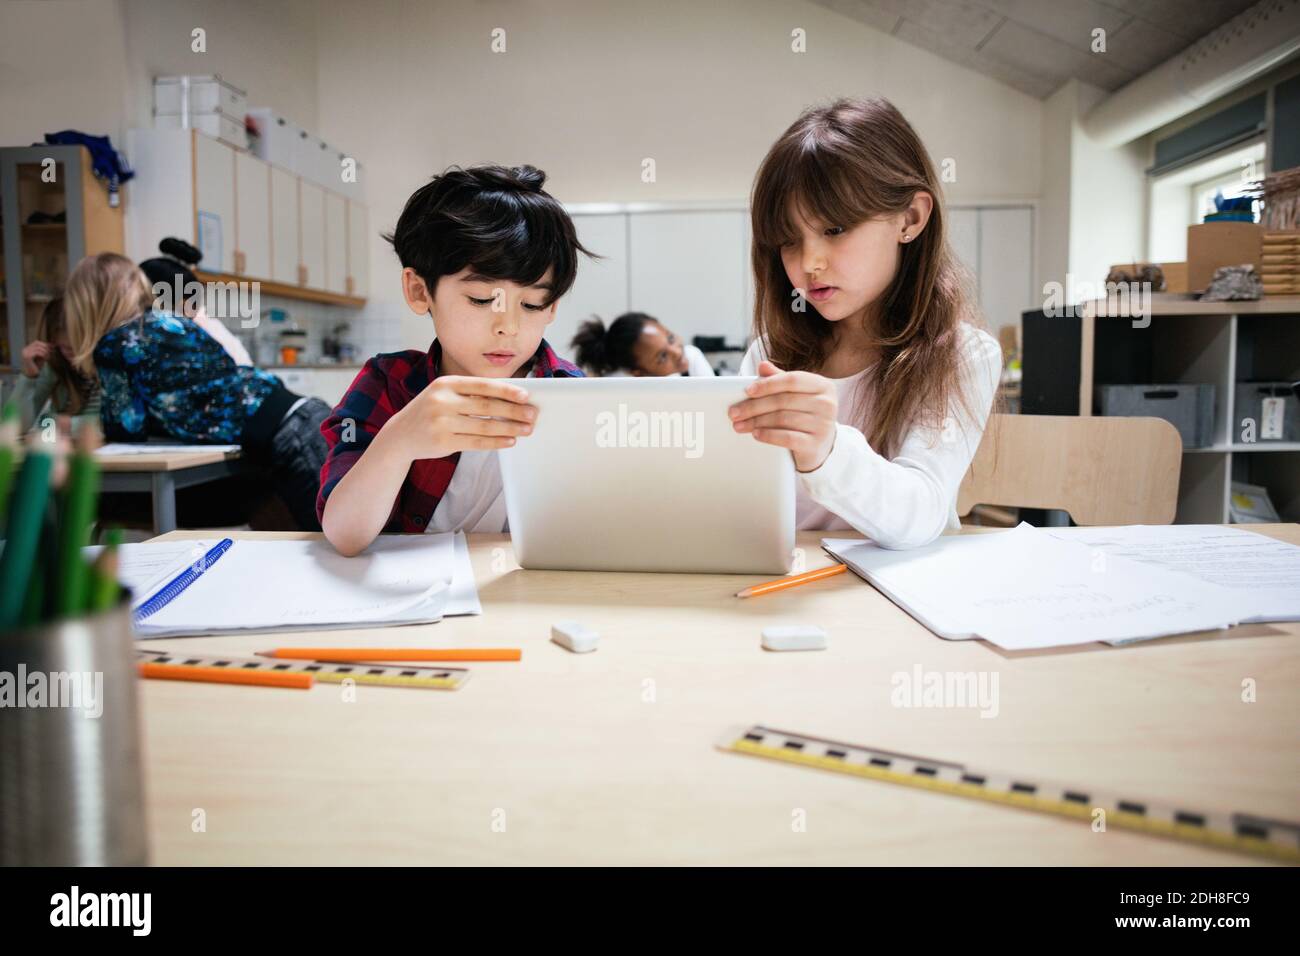 Concentrated students using digital tablet at desk in classroom Stock Photo